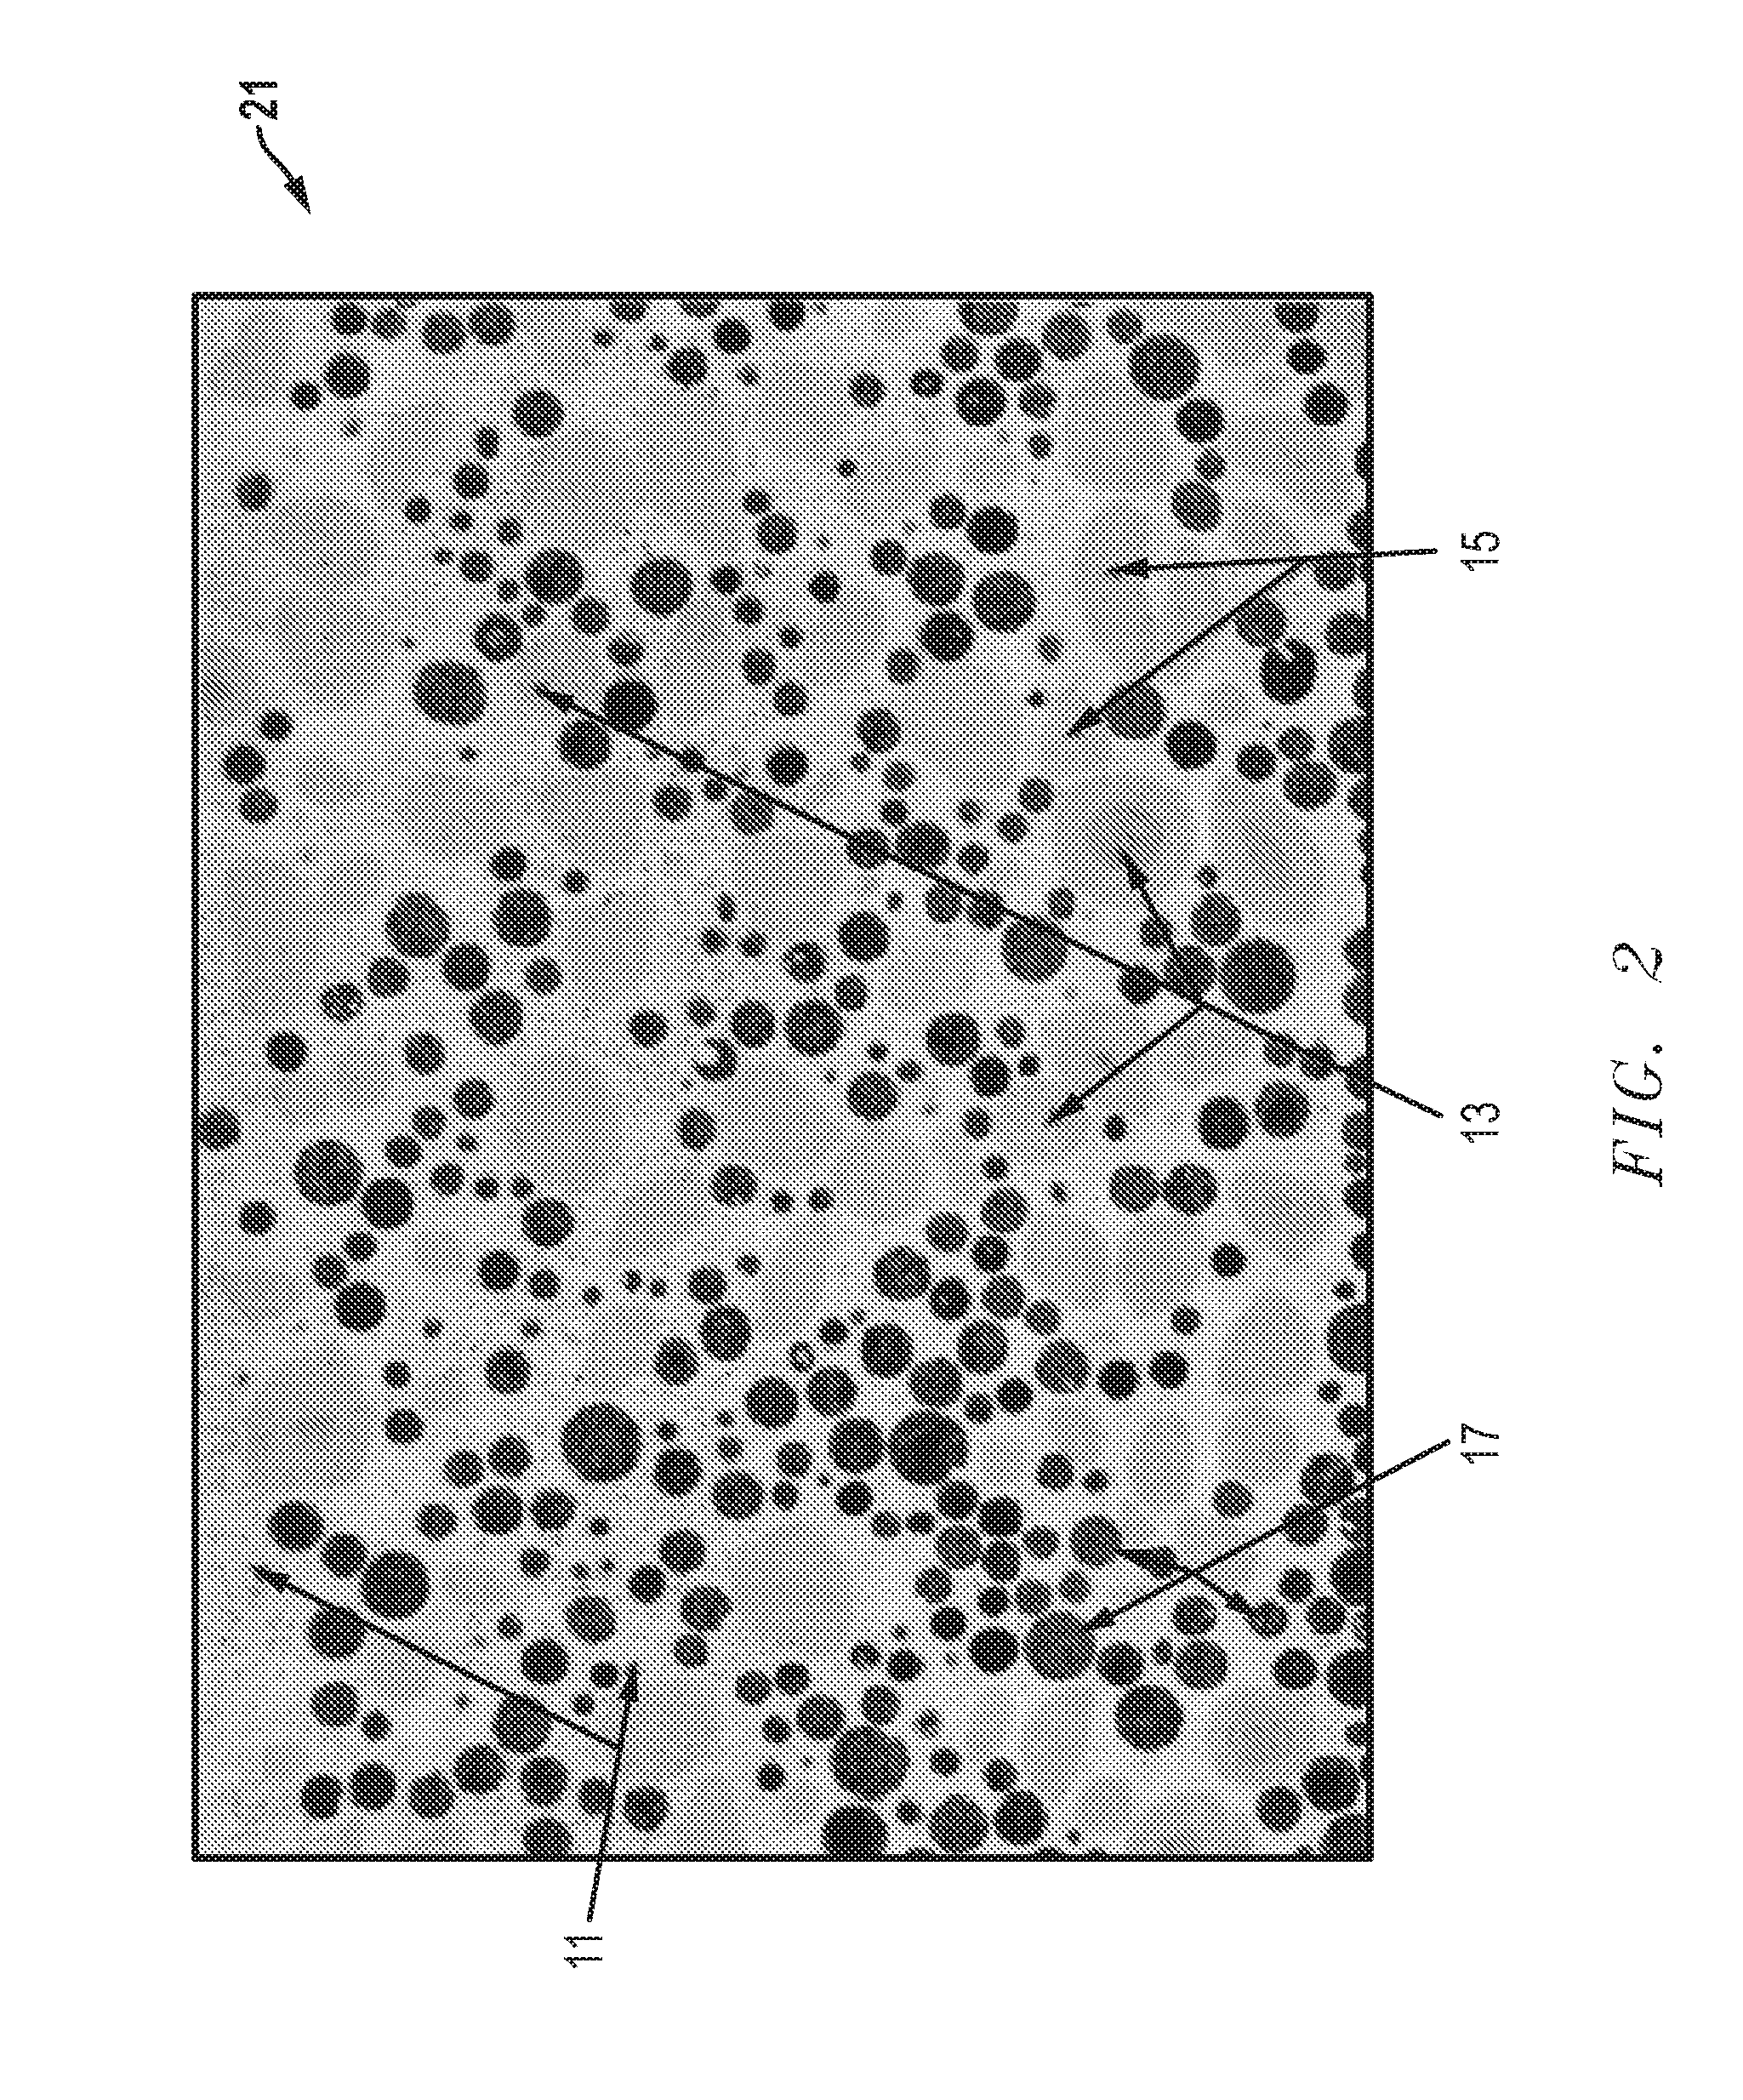 System, method and apparatus for hardfacing composition for earth boring bits in highly abrasive wear conditions using metal matrix materials